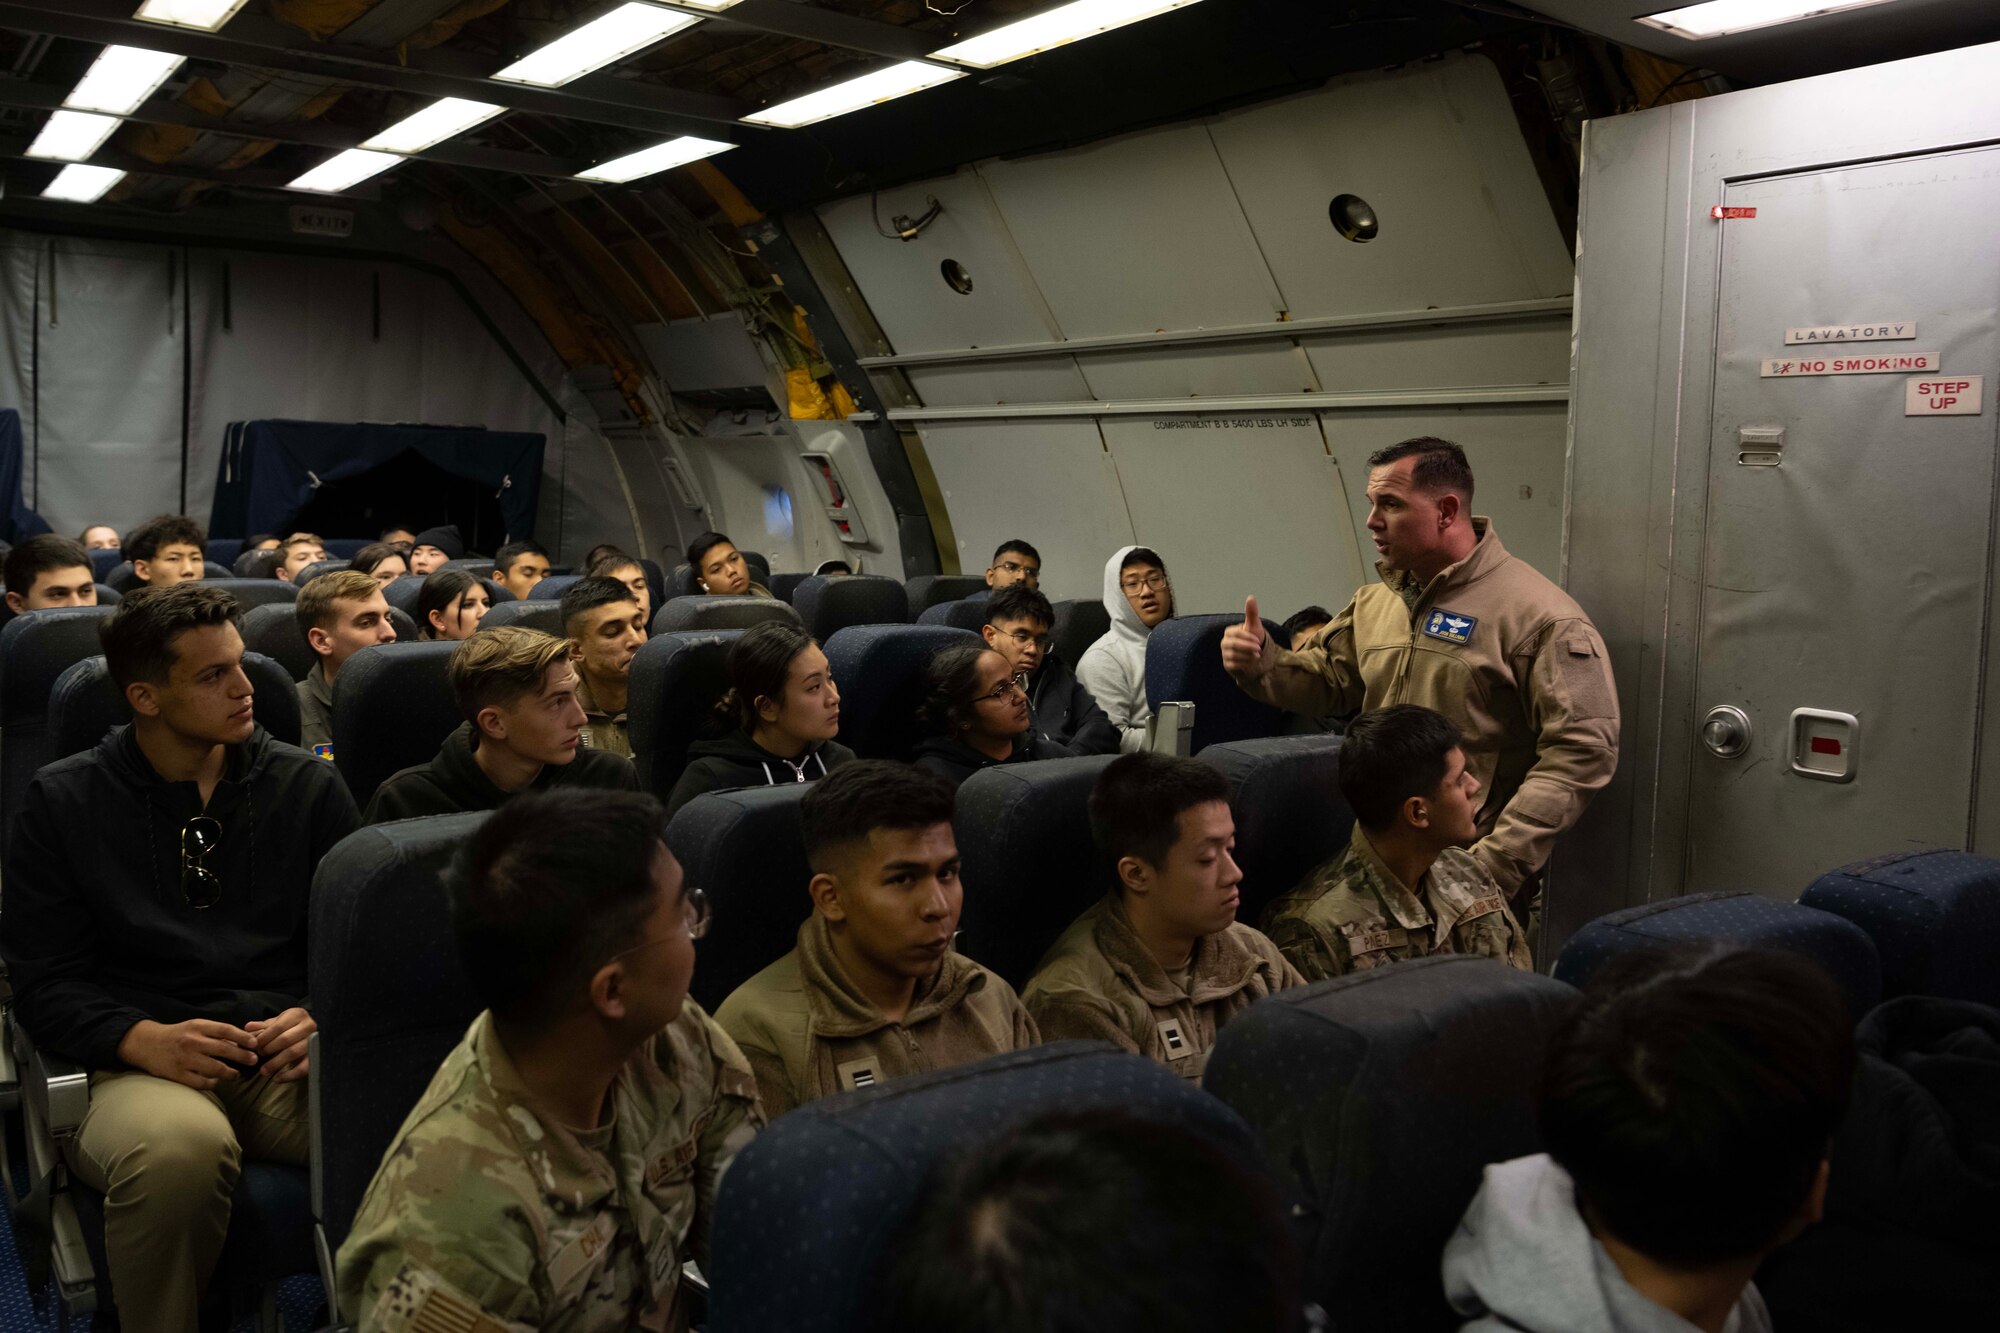 An Airman talks to cadets on a military aircraft